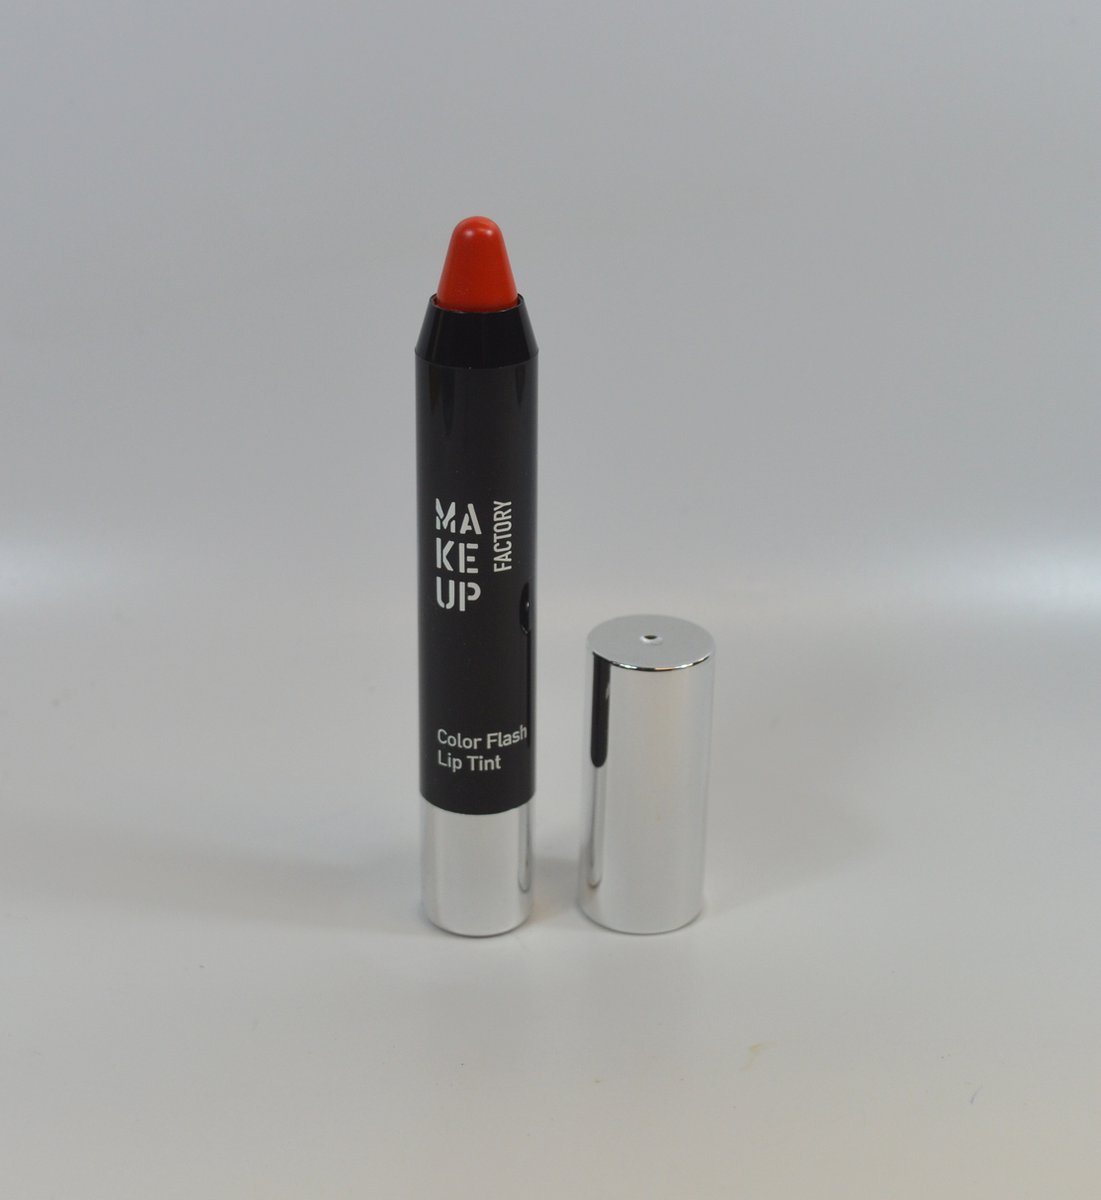 Make Up Factory Color Flash Lip Tint Lipstick #35 Red Melon